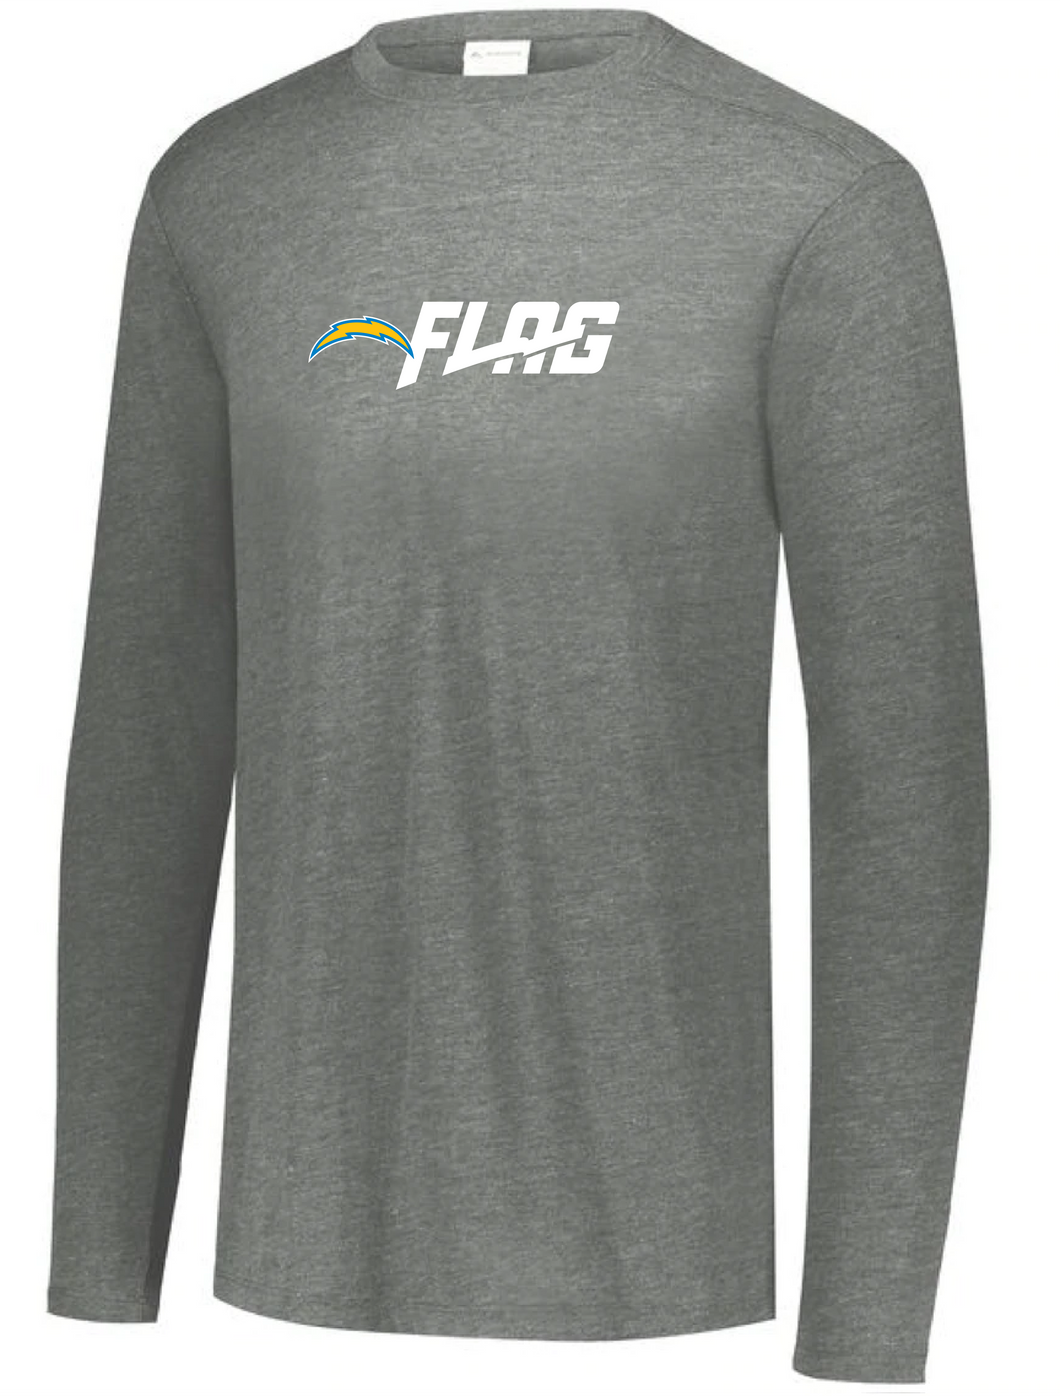 Long Sleeve Tri Blend - Adult - Los Angeles Chargers